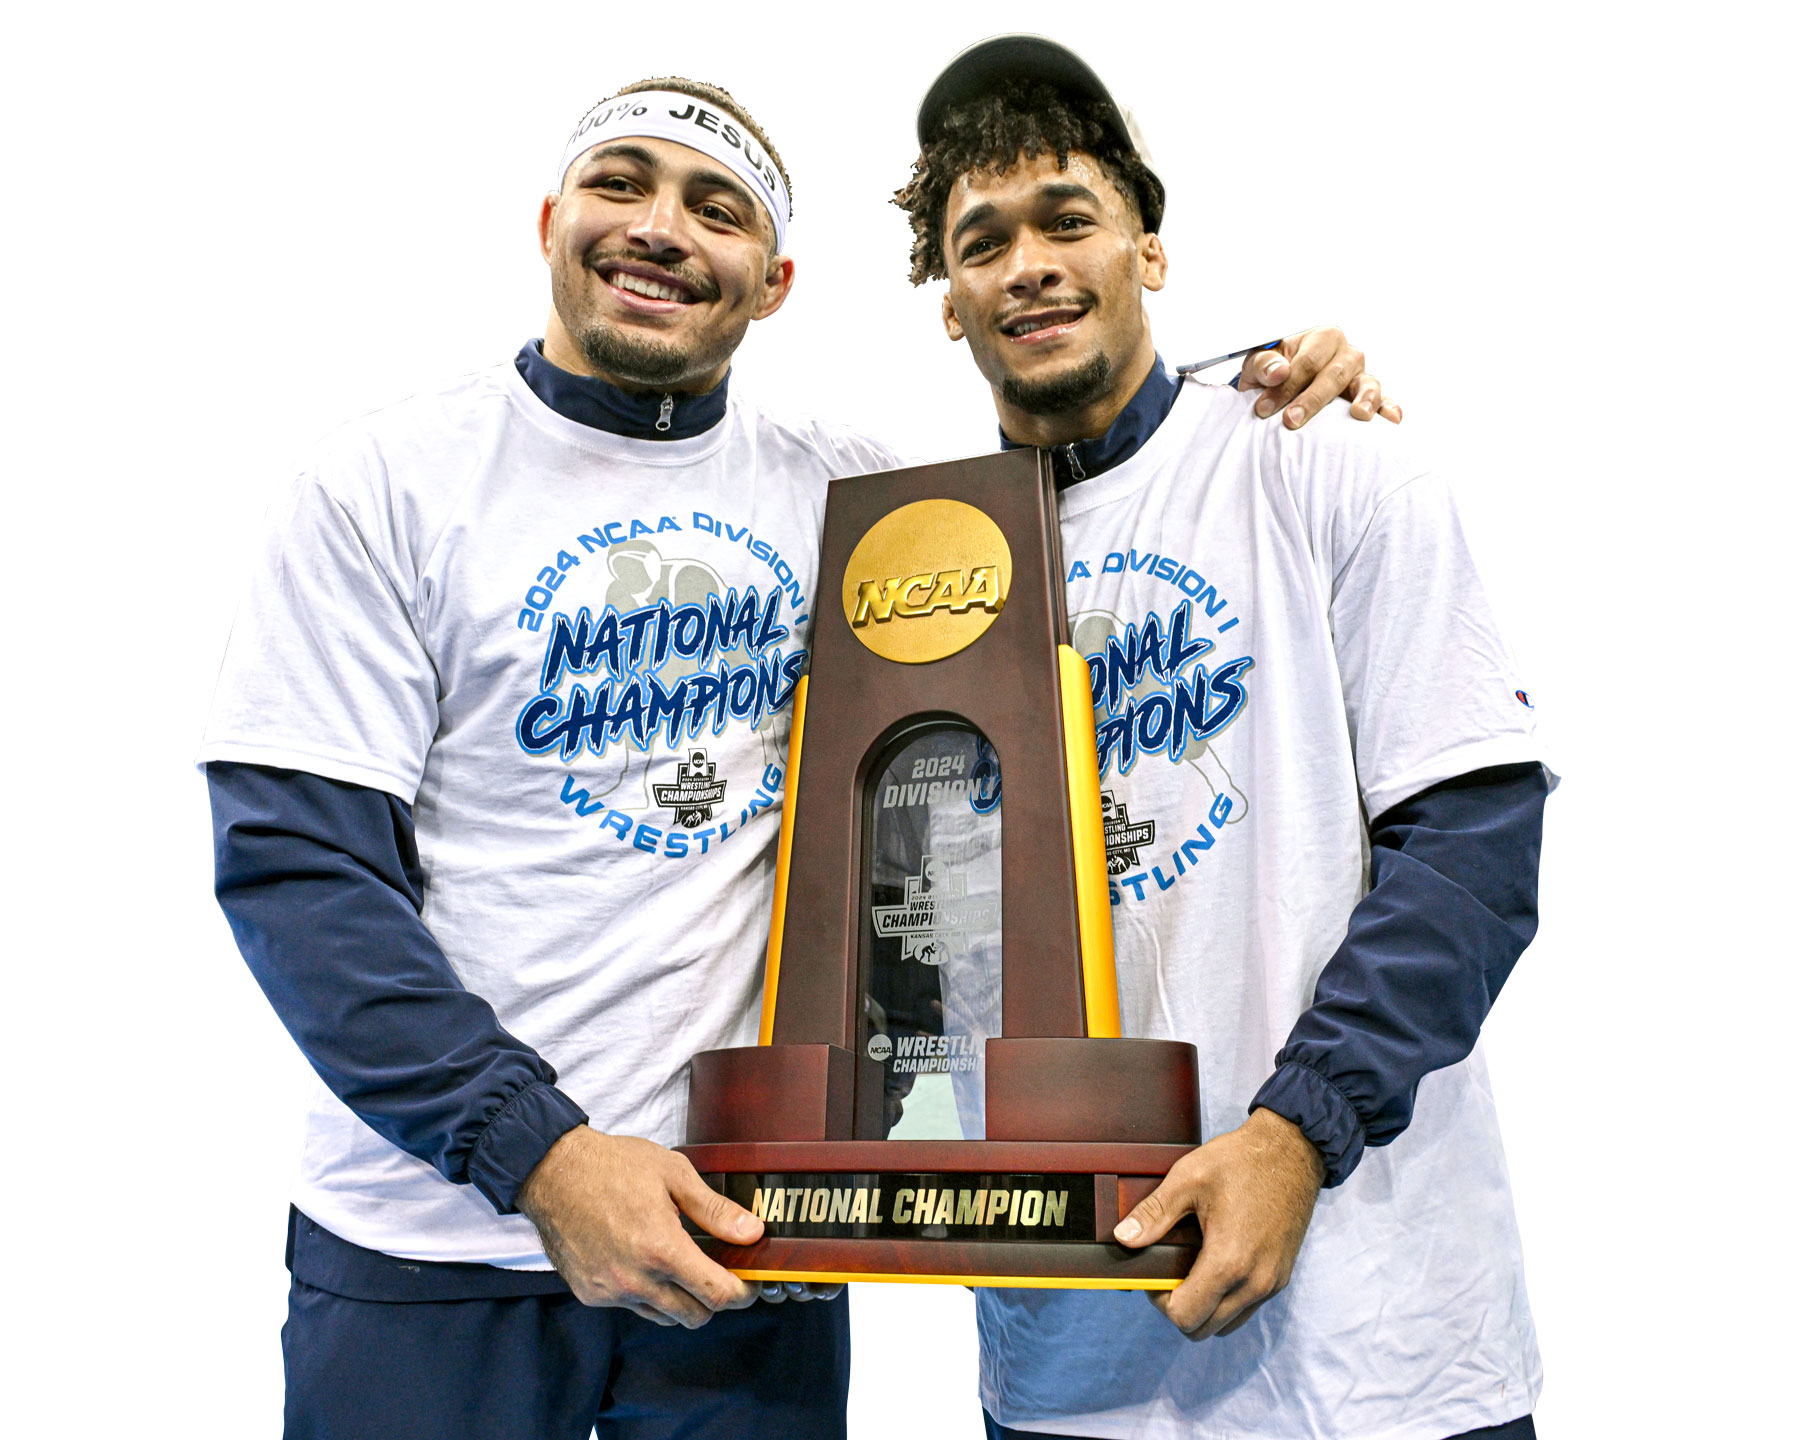 Brooks and Starocci holding up the trophy by Mark Selders/Penn State Athletics